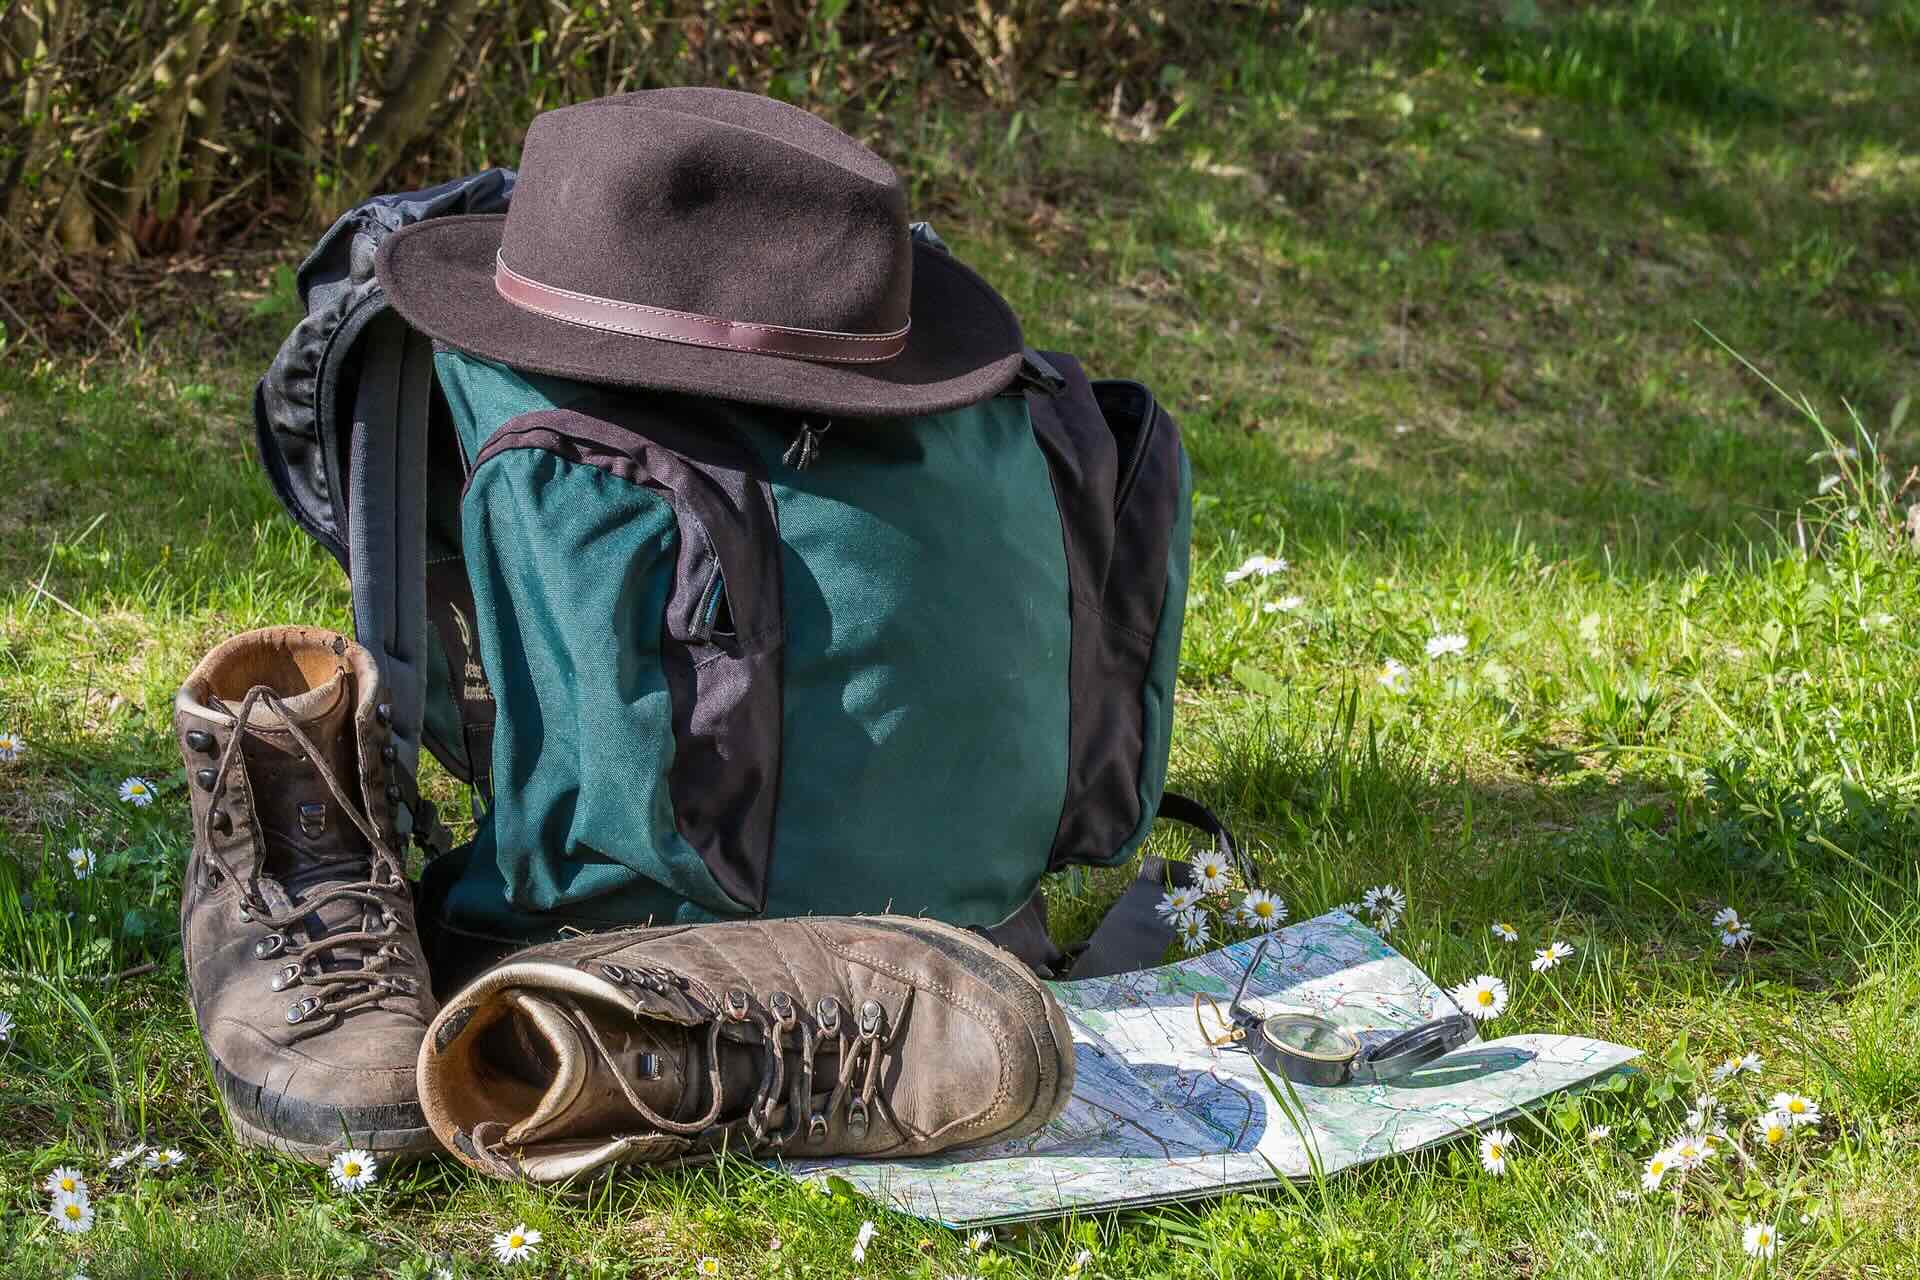 Hiking Gear Review: Top Picks for Outdoor Enthusiasts